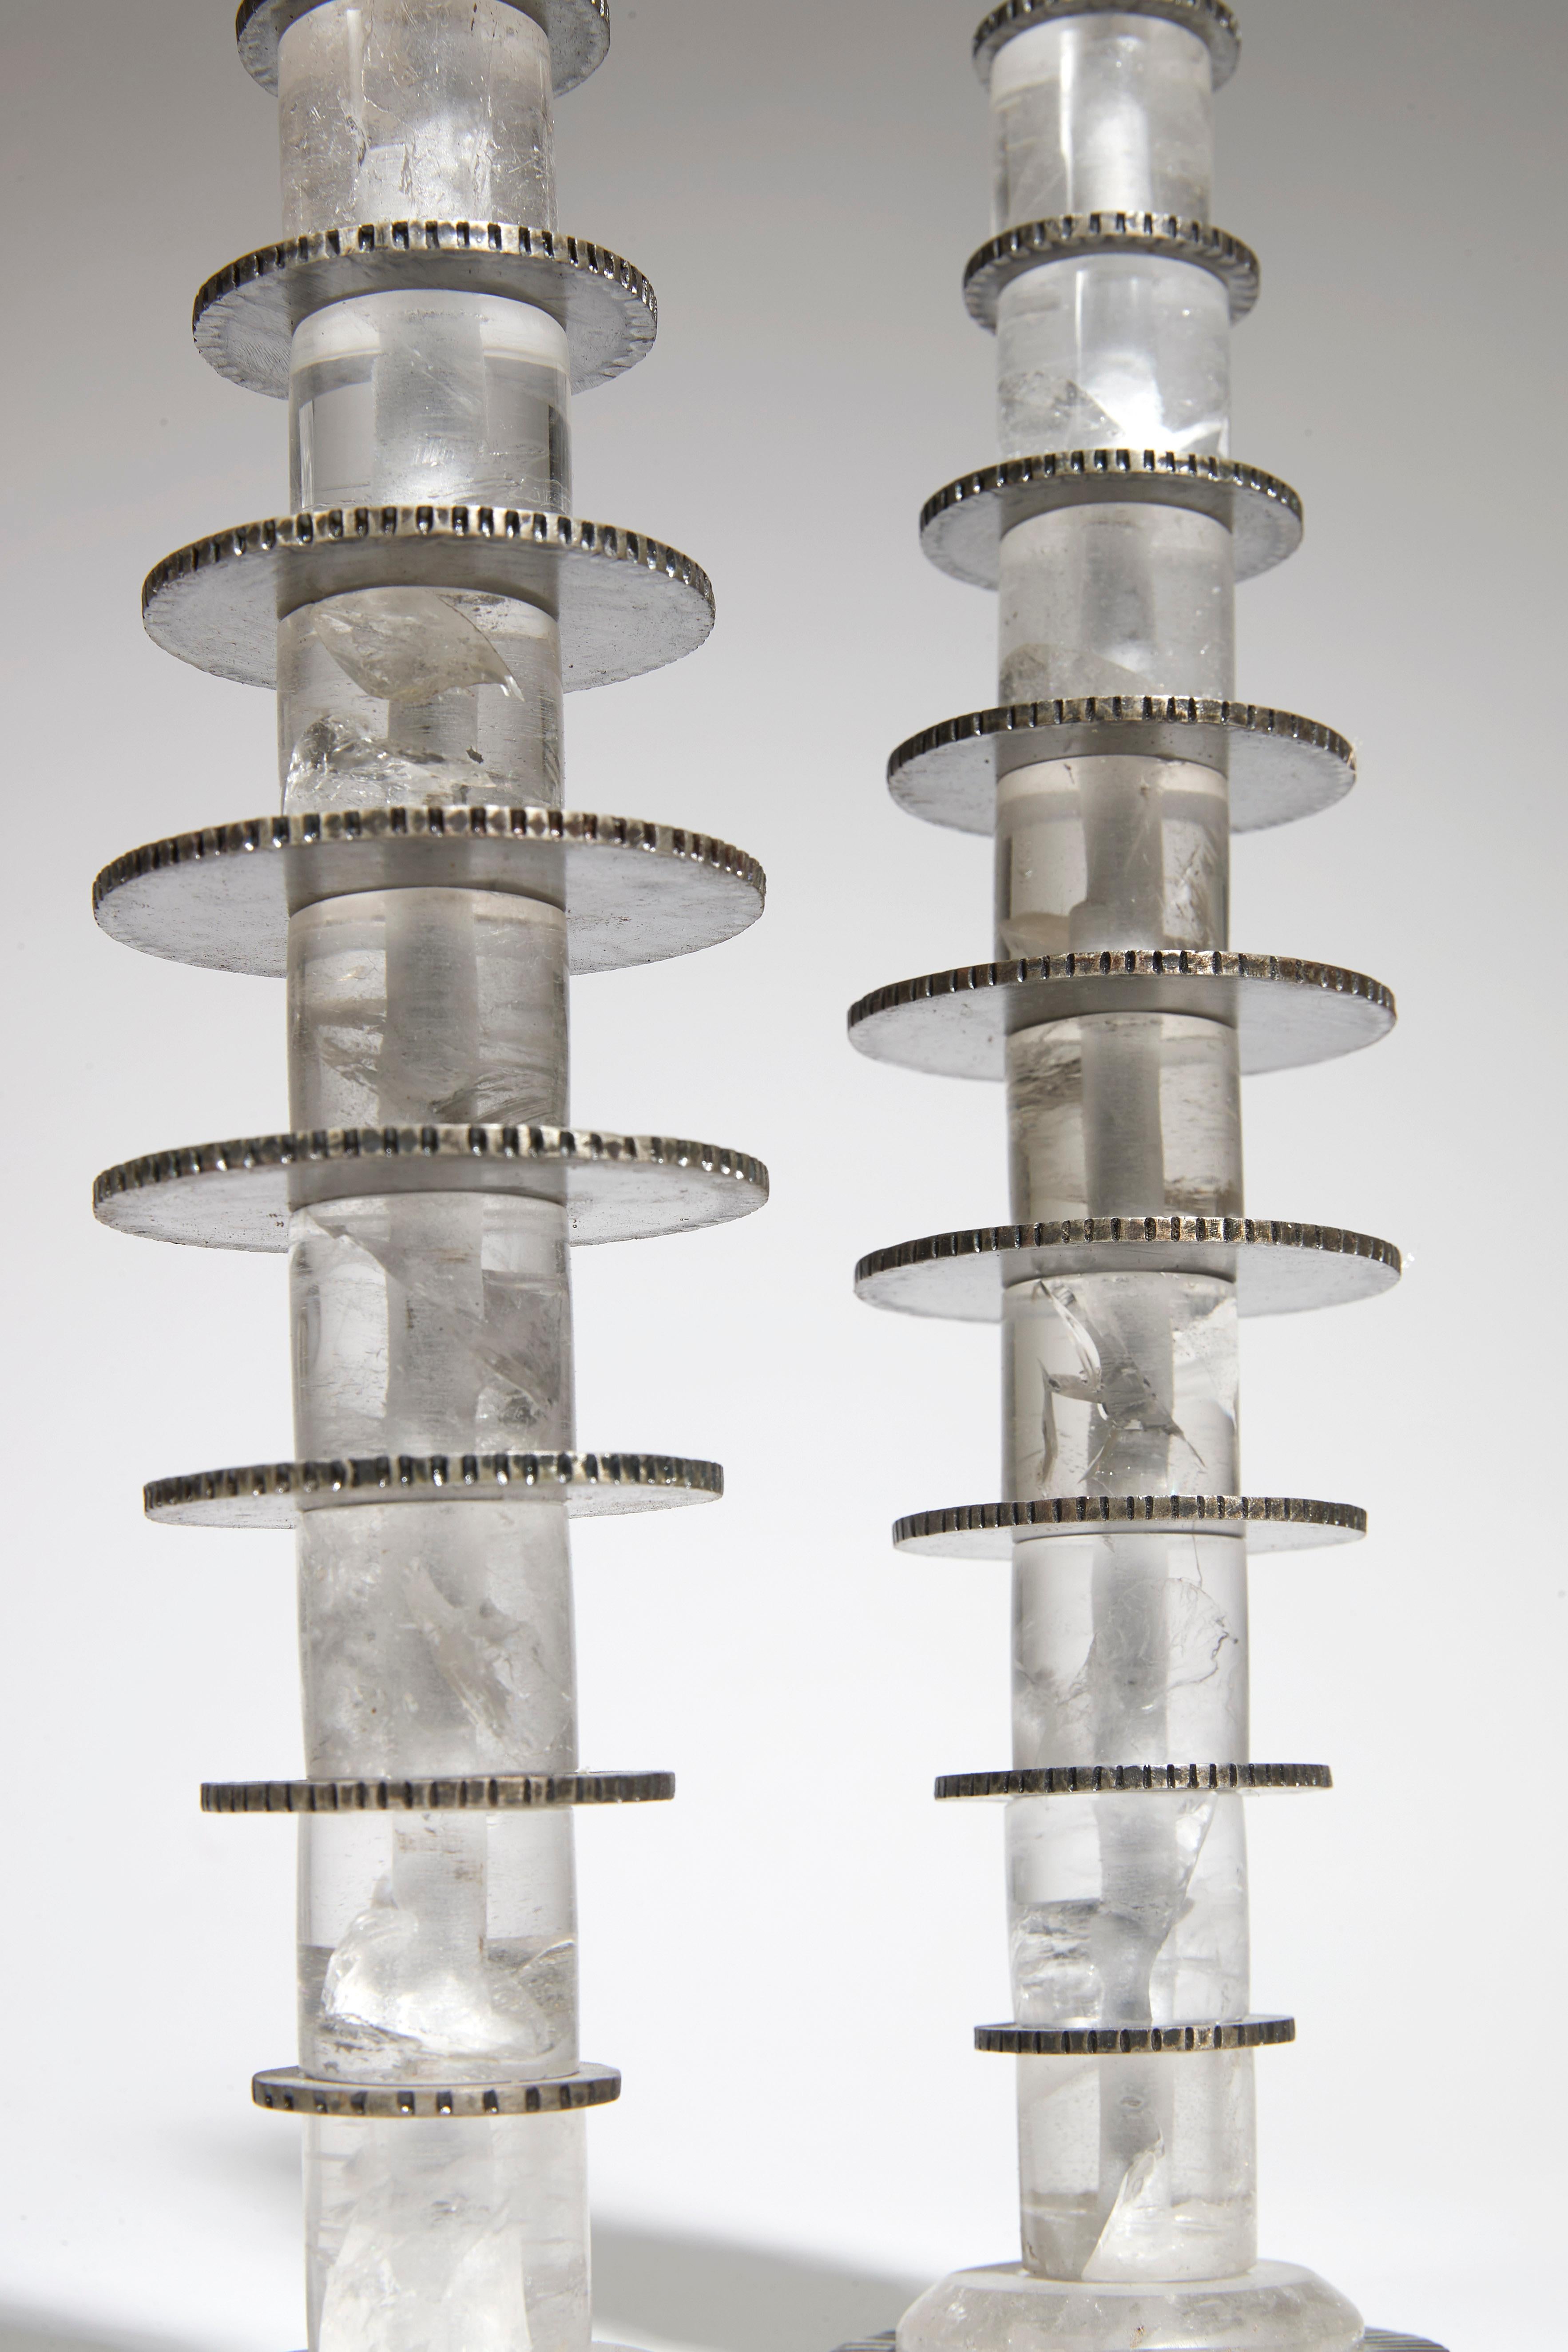 Nine elements in rock crystal, spacers and base in hammered wrought iron.